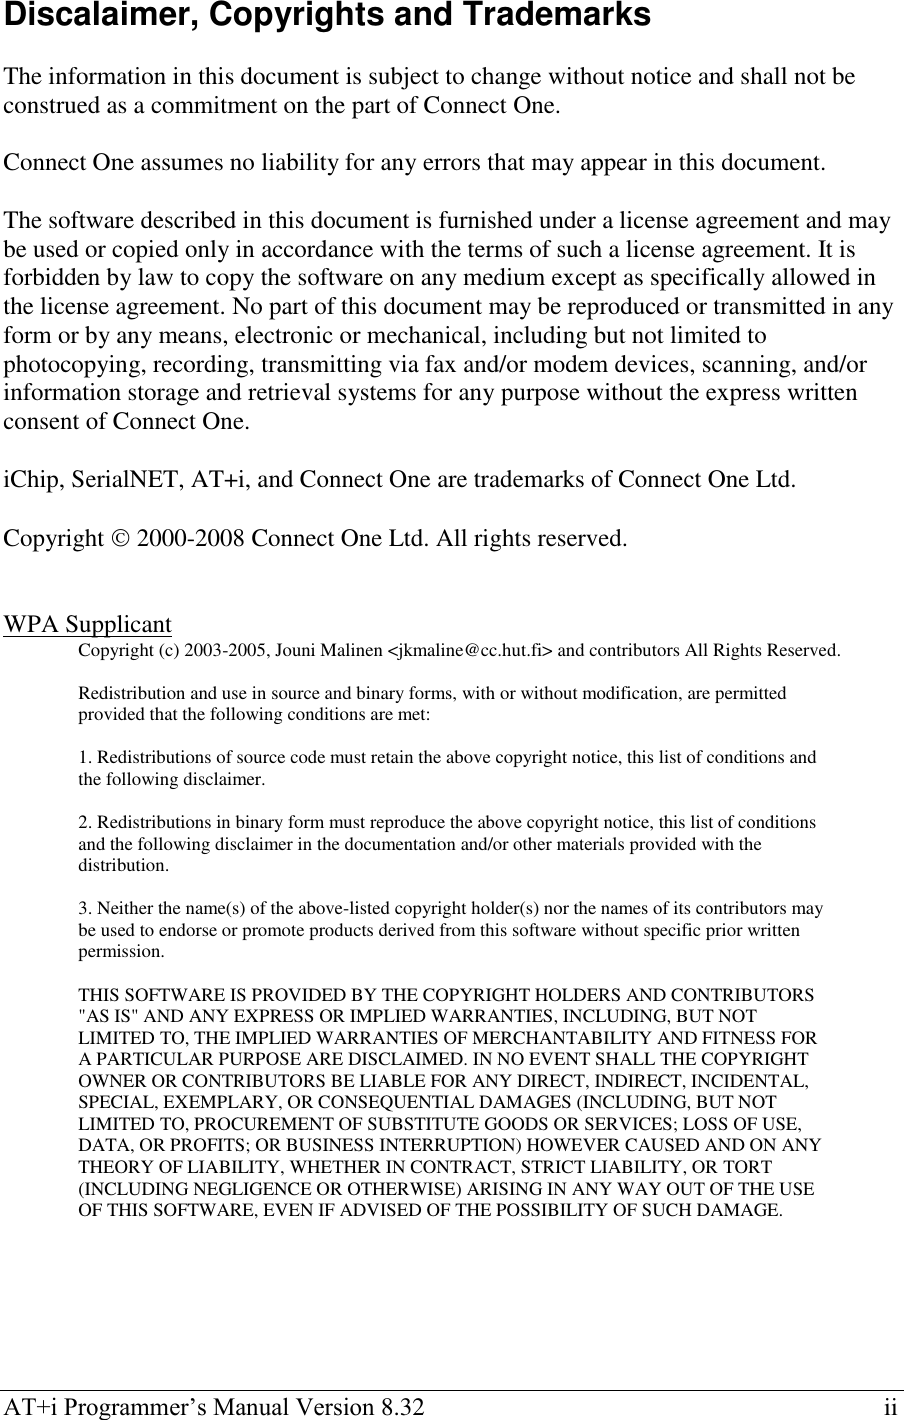  AT+i Programmer‘s Manual Version 8.32    ii Discalaimer, Copyrights and Trademarks  The information in this document is subject to change without notice and shall not be construed as a commitment on the part of Connect One.   Connect One assumes no liability for any errors that may appear in this document.  The software described in this document is furnished under a license agreement and may be used or copied only in accordance with the terms of such a license agreement. It is forbidden by law to copy the software on any medium except as specifically allowed in the license agreement. No part of this document may be reproduced or transmitted in any form or by any means, electronic or mechanical, including but not limited to photocopying, recording, transmitting via fax and/or modem devices, scanning, and/or information storage and retrieval systems for any purpose without the express written consent of Connect One.  iChip, SerialNET, AT+i, and Connect One are trademarks of Connect One Ltd.  Copyright  2000-2008 Connect One Ltd. All rights reserved.   WPA Supplicant Copyright (c) 2003-2005, Jouni Malinen &lt;jkmaline@cc.hut.fi&gt; and contributors All Rights Reserved.  Redistribution and use in source and binary forms, with or without modification, are permitted provided that the following conditions are met:  1. Redistributions of source code must retain the above copyright notice, this list of conditions and the following disclaimer.  2. Redistributions in binary form must reproduce the above copyright notice, this list of conditions and the following disclaimer in the documentation and/or other materials provided with the distribution.  3. Neither the name(s) of the above-listed copyright holder(s) nor the names of its contributors may be used to endorse or promote products derived from this software without specific prior written permission.  THIS SOFTWARE IS PROVIDED BY THE COPYRIGHT HOLDERS AND CONTRIBUTORS &quot;AS IS&quot; AND ANY EXPRESS OR IMPLIED WARRANTIES, INCLUDING, BUT NOT LIMITED TO, THE IMPLIED WARRANTIES OF MERCHANTABILITY AND FITNESS FOR A PARTICULAR PURPOSE ARE DISCLAIMED. IN NO EVENT SHALL THE COPYRIGHT OWNER OR CONTRIBUTORS BE LIABLE FOR ANY DIRECT, INDIRECT, INCIDENTAL, SPECIAL, EXEMPLARY, OR CONSEQUENTIAL DAMAGES (INCLUDING, BUT NOT LIMITED TO, PROCUREMENT OF SUBSTITUTE GOODS OR SERVICES; LOSS OF USE, DATA, OR PROFITS; OR BUSINESS INTERRUPTION) HOWEVER CAUSED AND ON ANY THEORY OF LIABILITY, WHETHER IN CONTRACT, STRICT LIABILITY, OR TORT (INCLUDING NEGLIGENCE OR OTHERWISE) ARISING IN ANY WAY OUT OF THE USE OF THIS SOFTWARE, EVEN IF ADVISED OF THE POSSIBILITY OF SUCH DAMAGE.